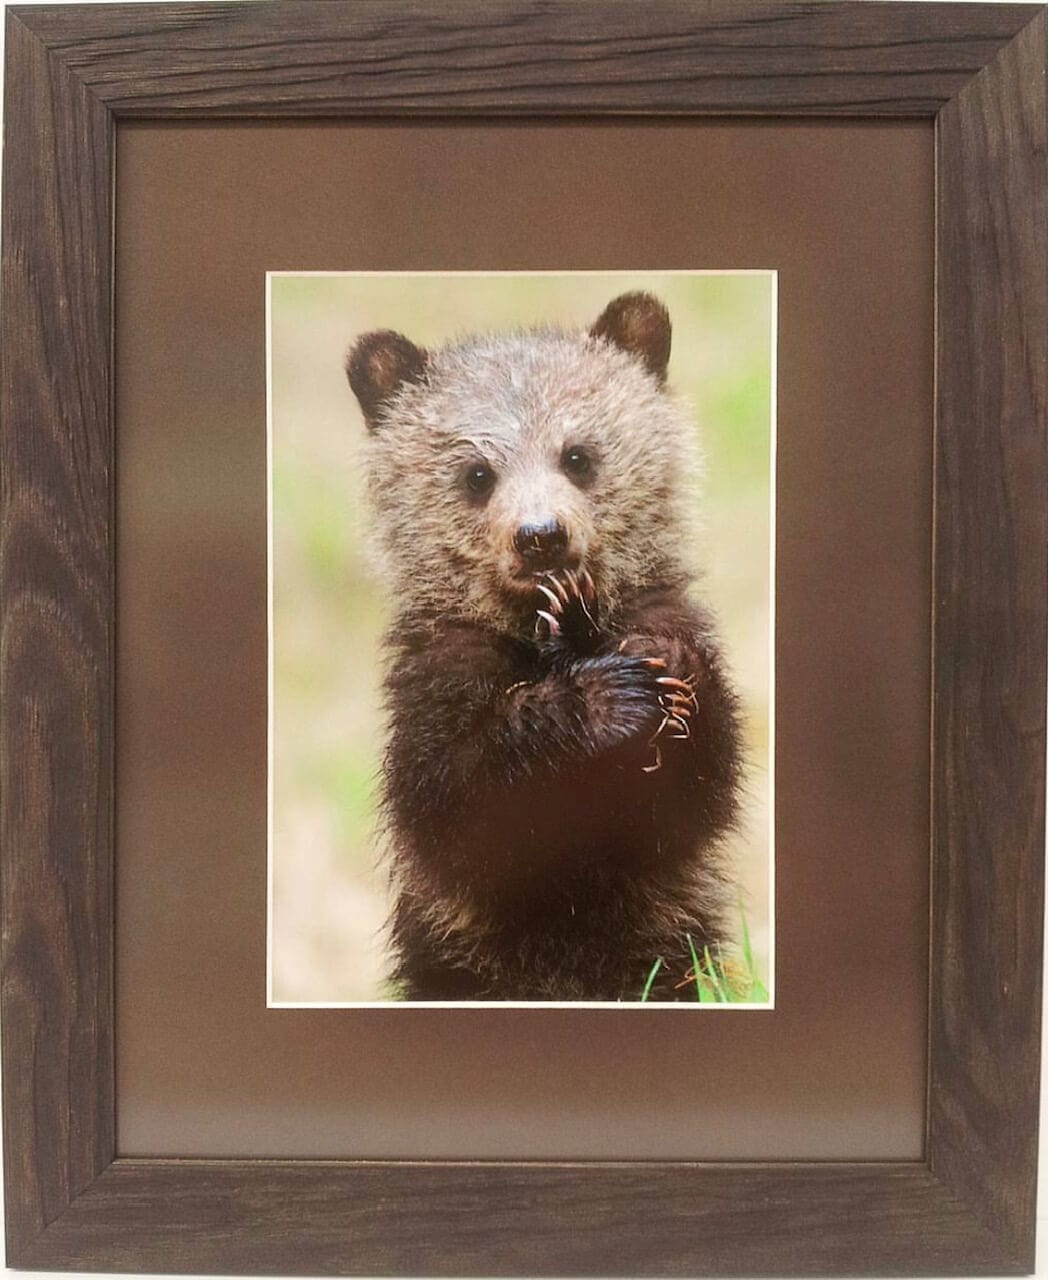 A bear cub is holding a paw in a wooden frame.